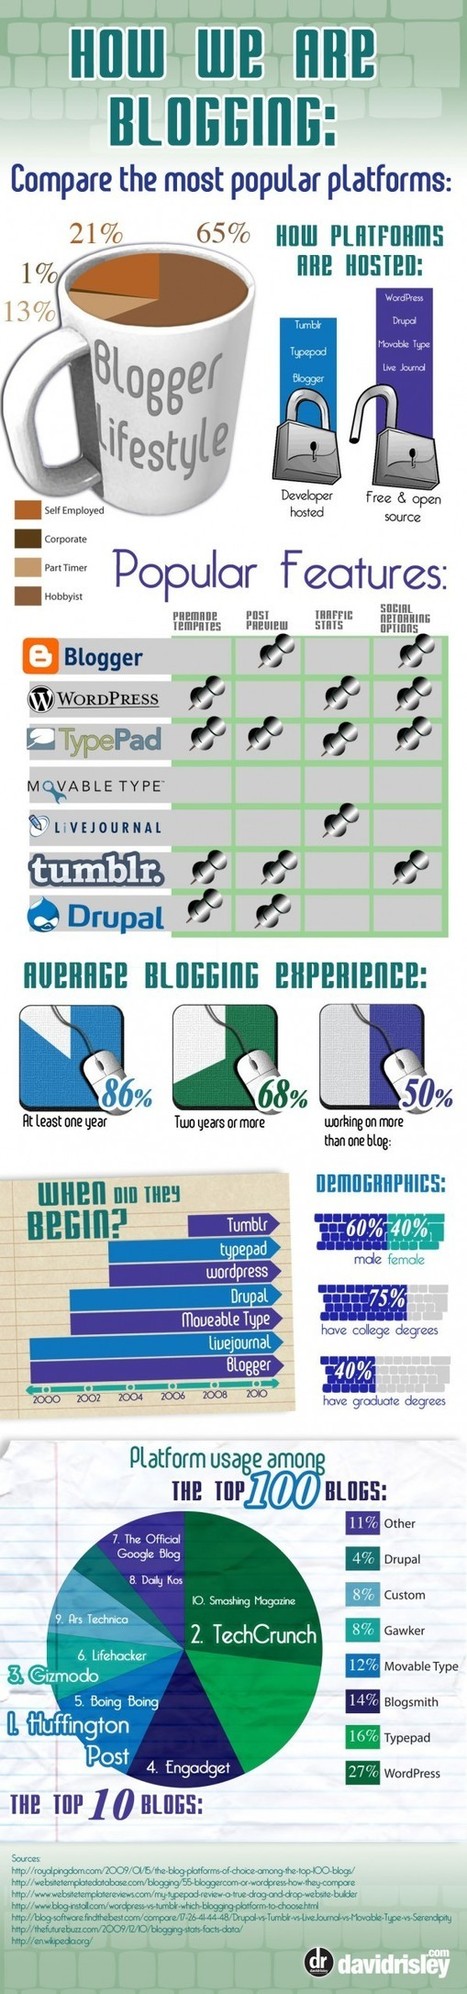 Most Popular Blogging Platforms and Top Blogs Compared [Infographic] | All Infographics | The 21st Century | Scoop.it